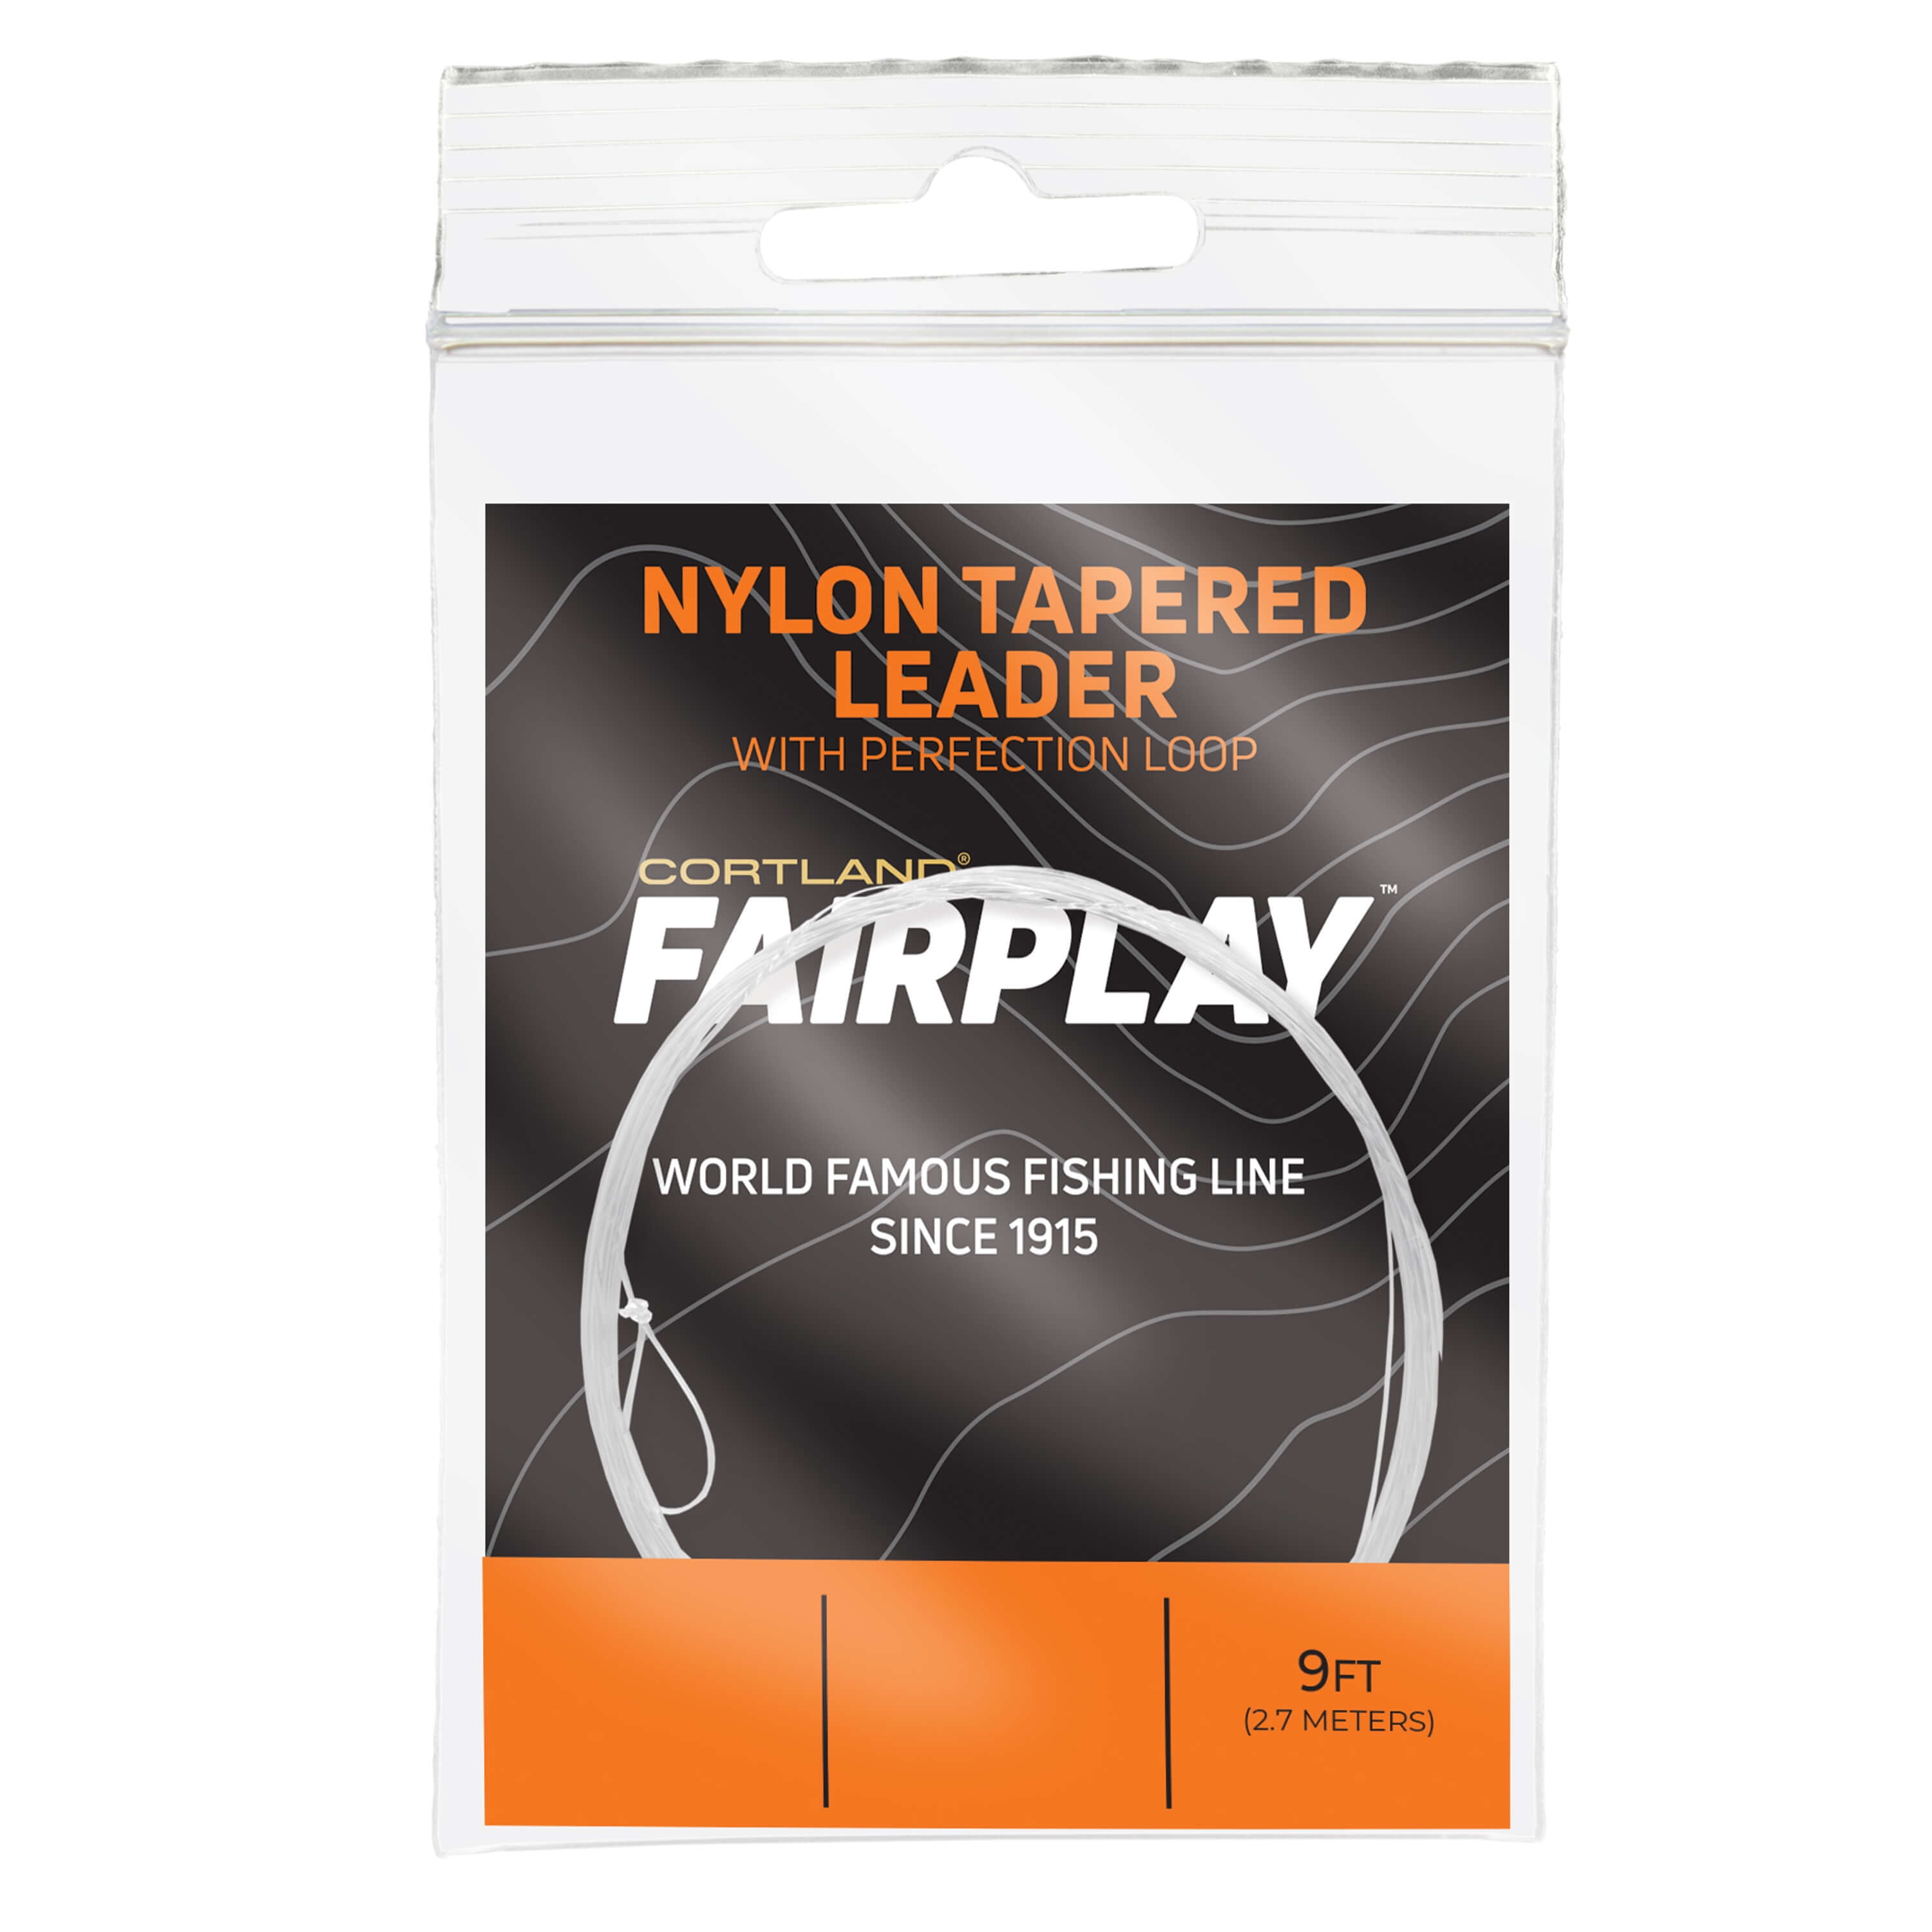 Fairplay Pro Fluorocarbon Tippet Material